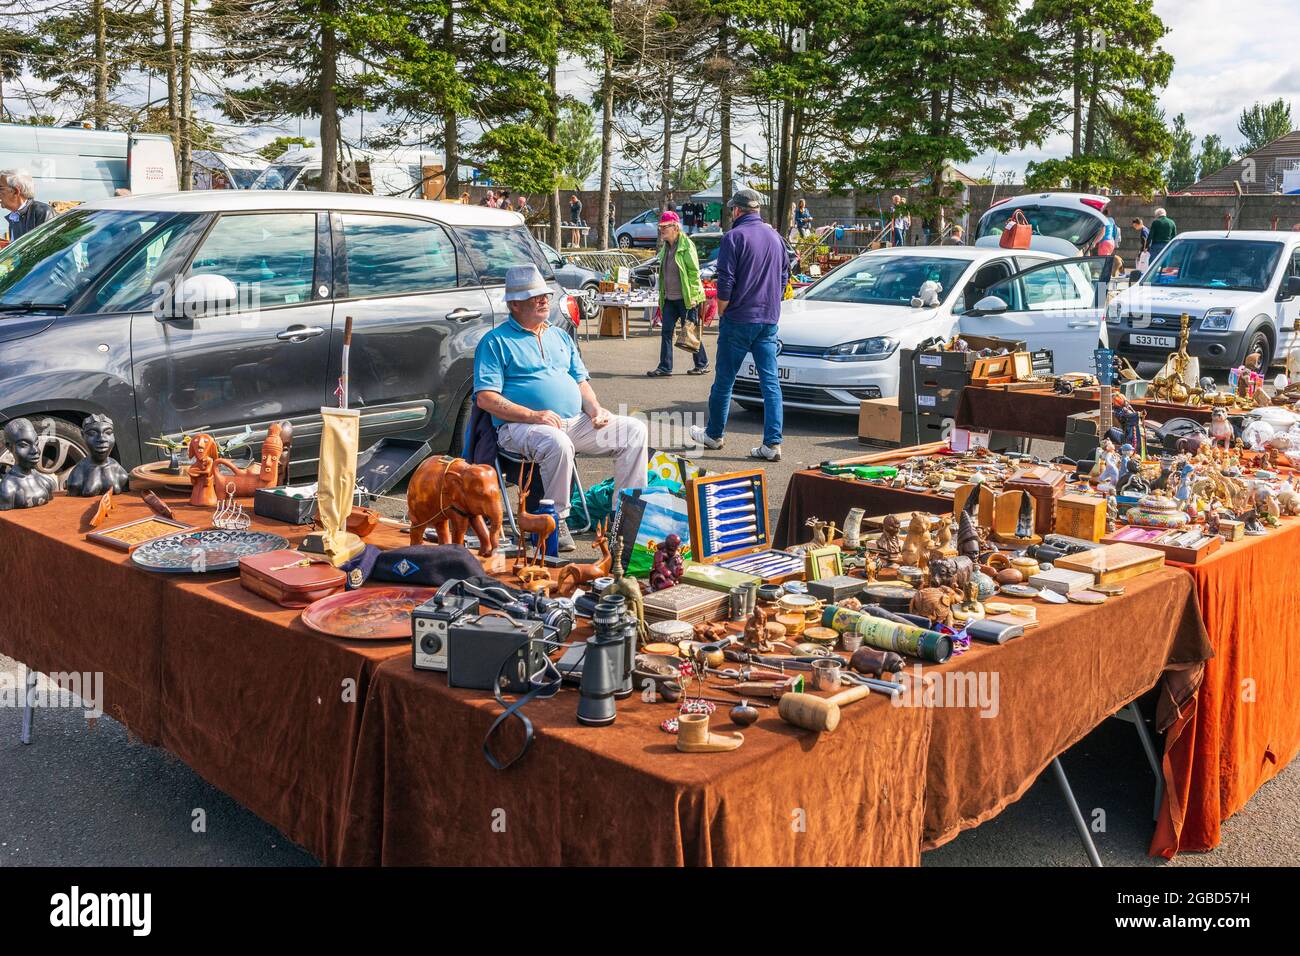 Stall holders at the car boot sale market, Ayr, Scotland, UK Stock Photo -  Alamy